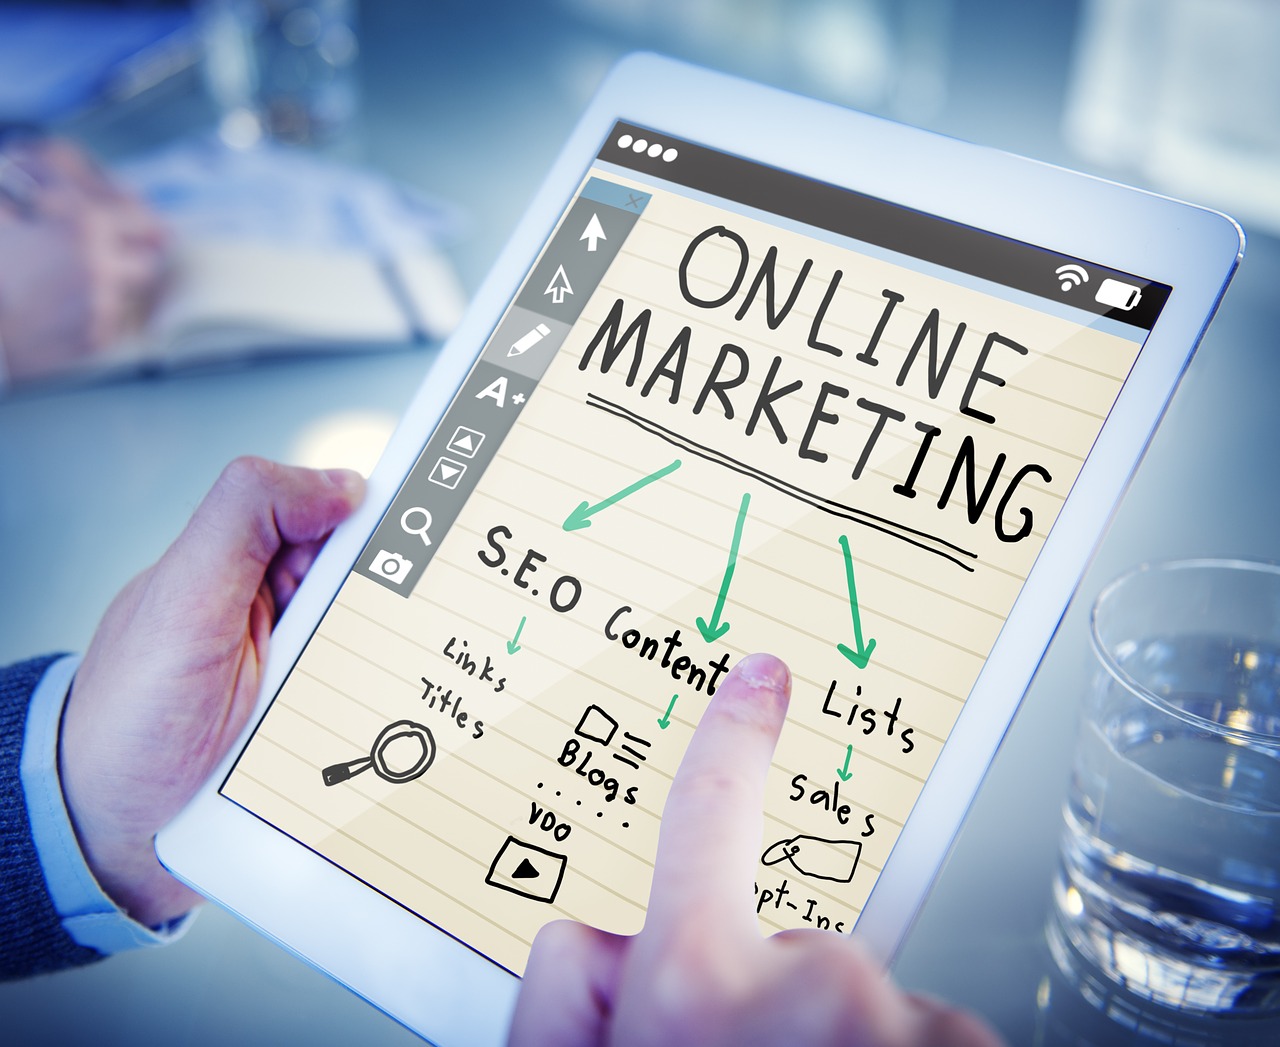 Article Marketing A Way For Online Marketing